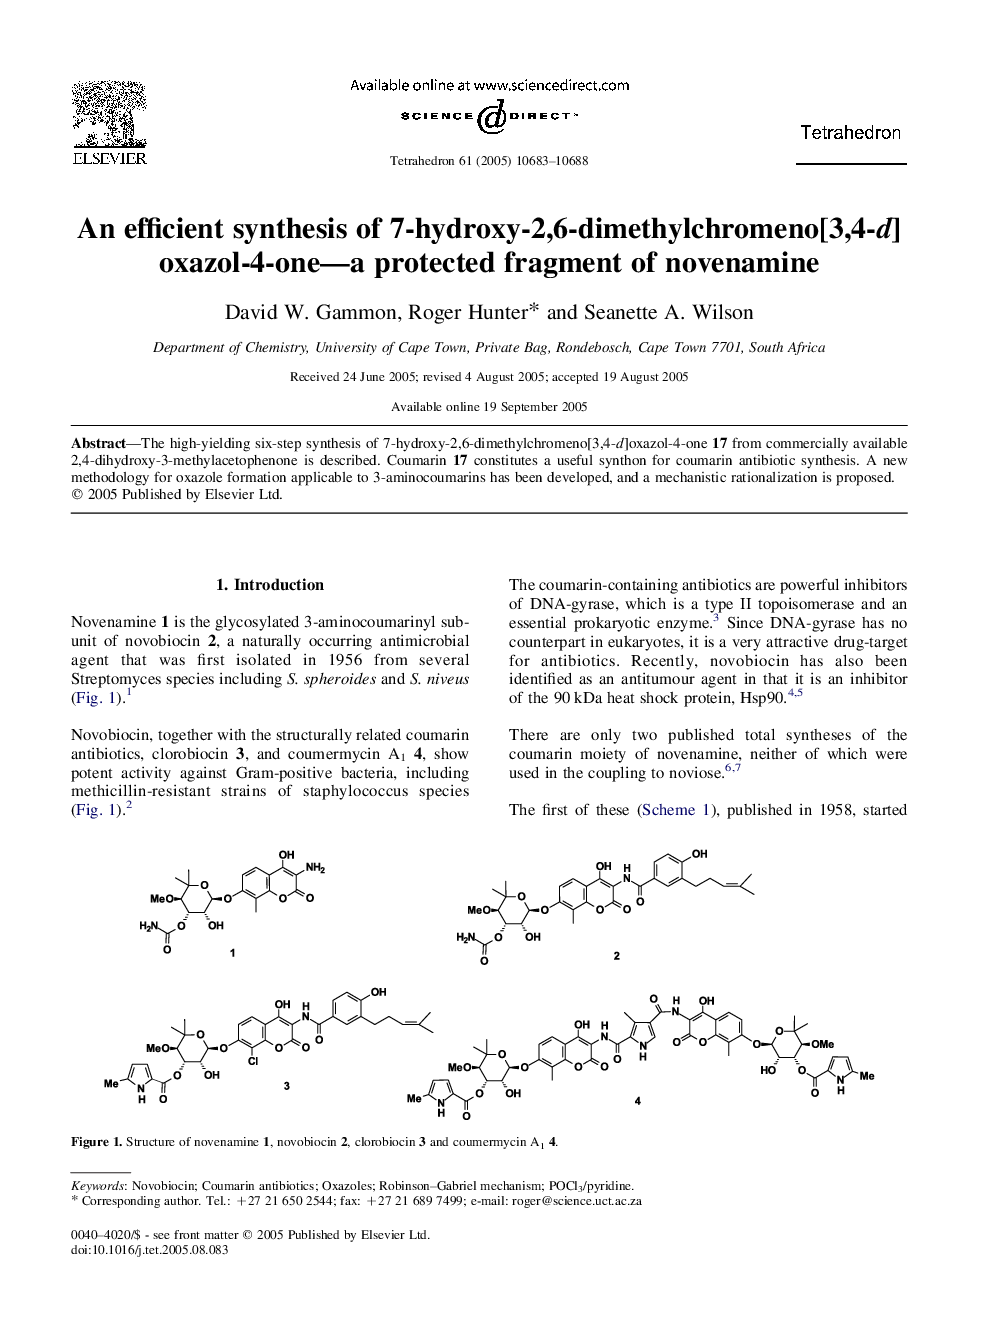 An efficient synthesis of 7-hydroxy-2,6-dimethylchromeno[3,4-d]oxazol-4-one-a protected fragment of novenamine